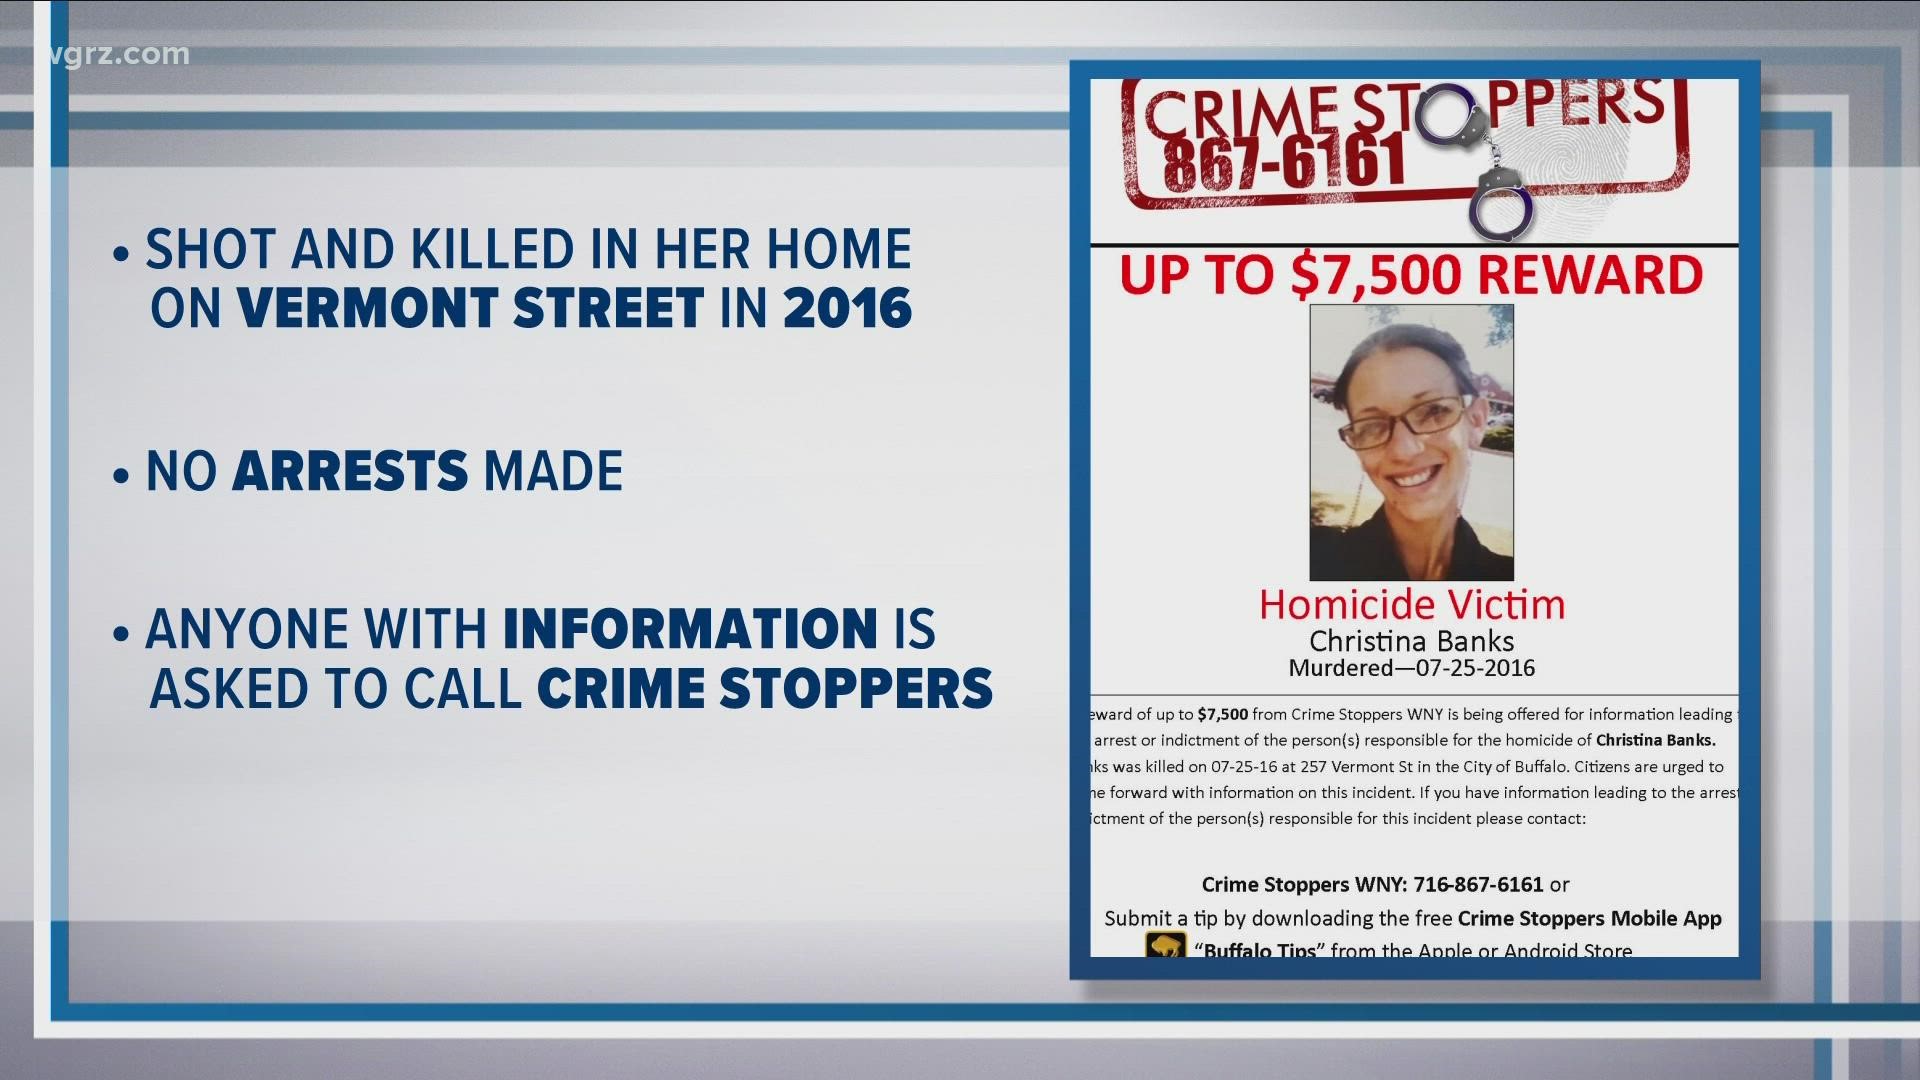 Police are trying to find the person who killed Christina Banks. She was shot and killed in her home.